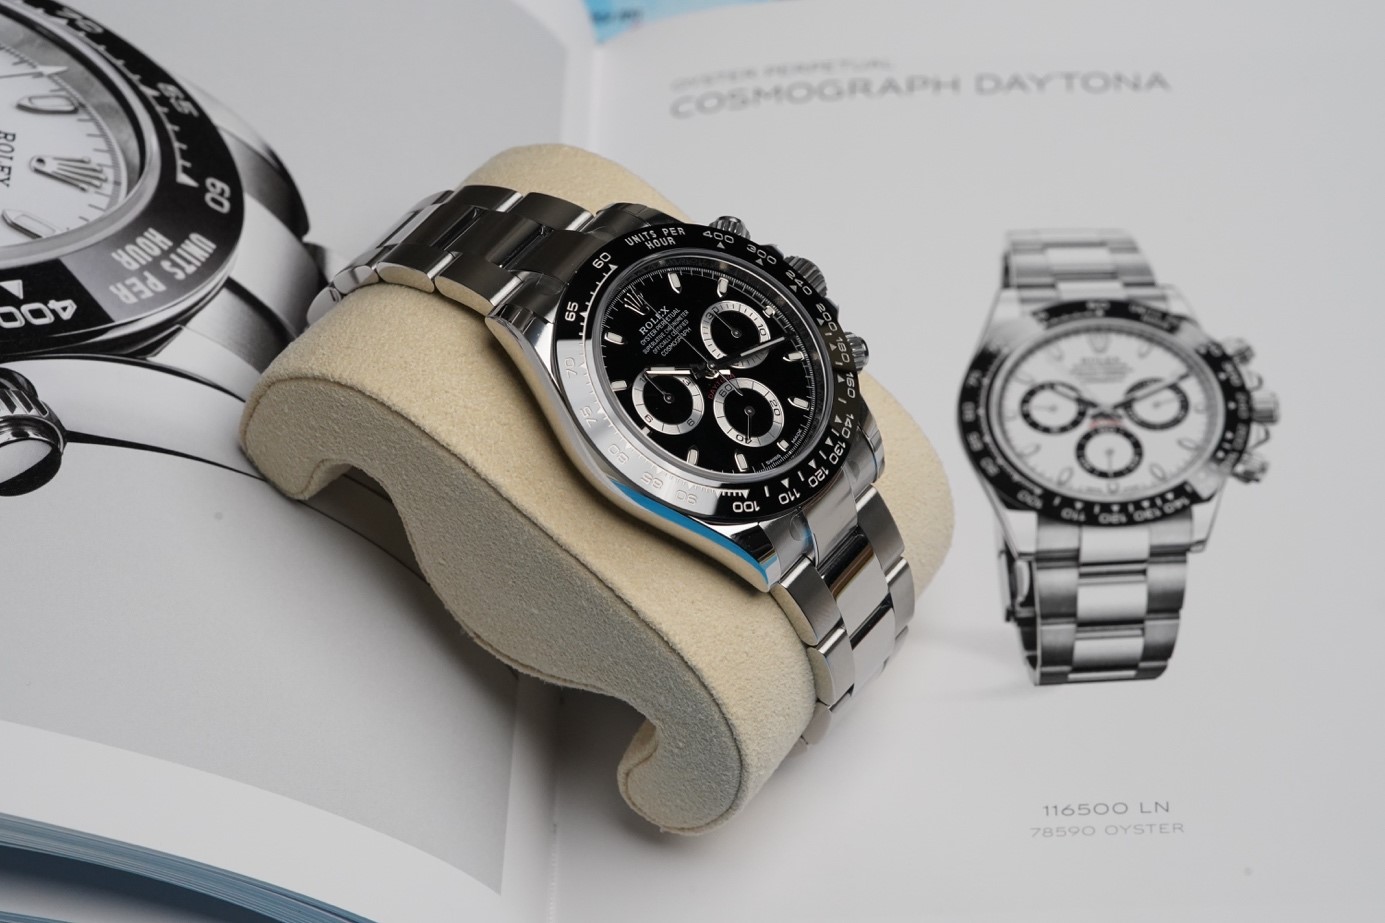 Rolex Cosmograph Daytona with in oystersteel with black dial and bezel Photo by Tran Phuc on Unsplash 